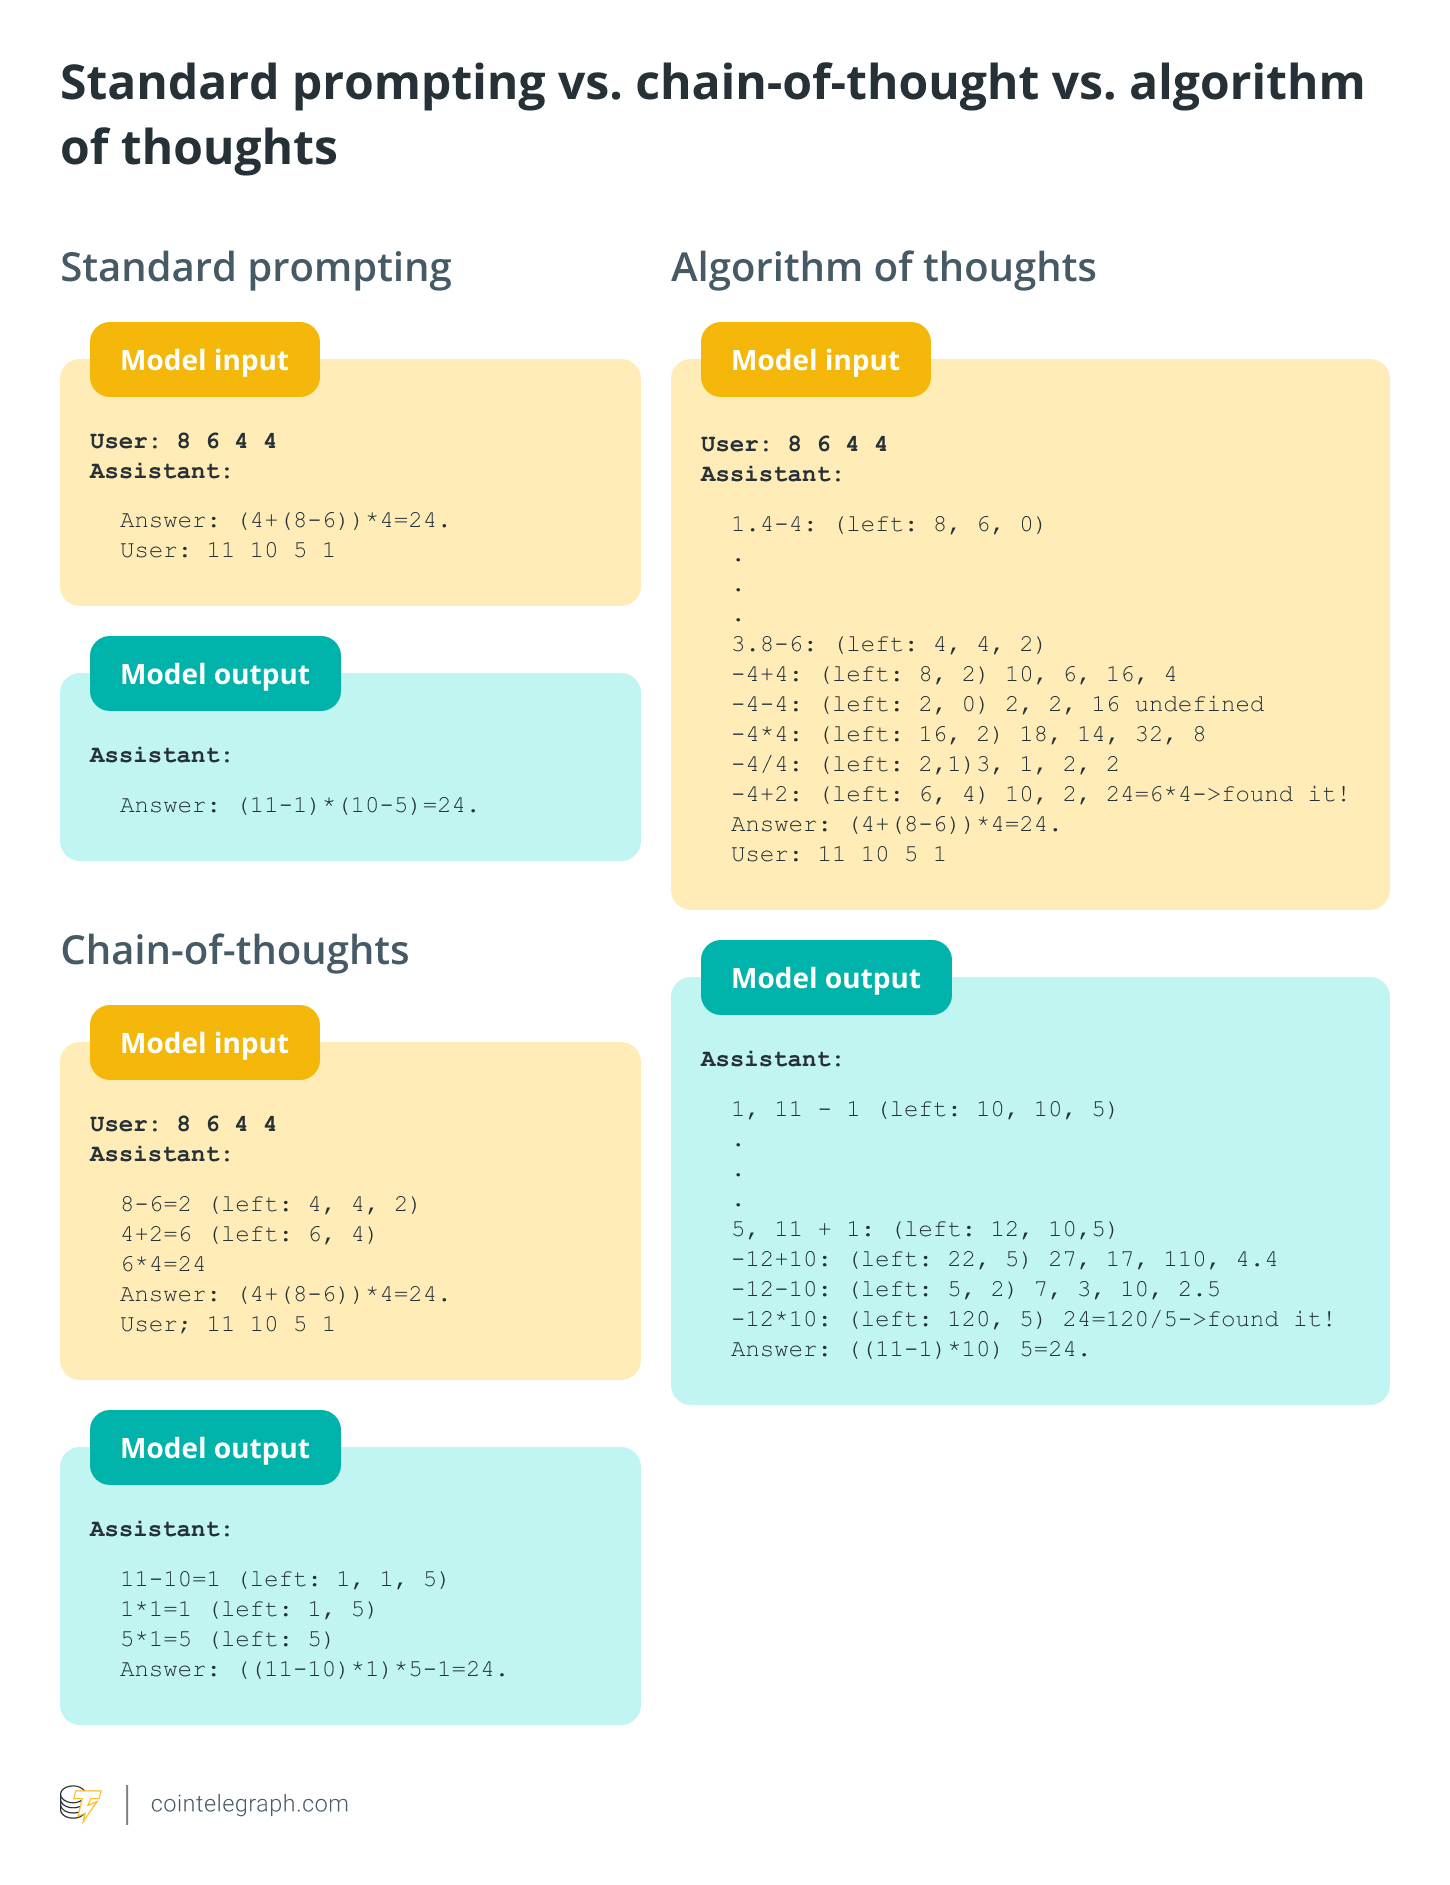 Standard stimulus, thought chain and thought algorithm